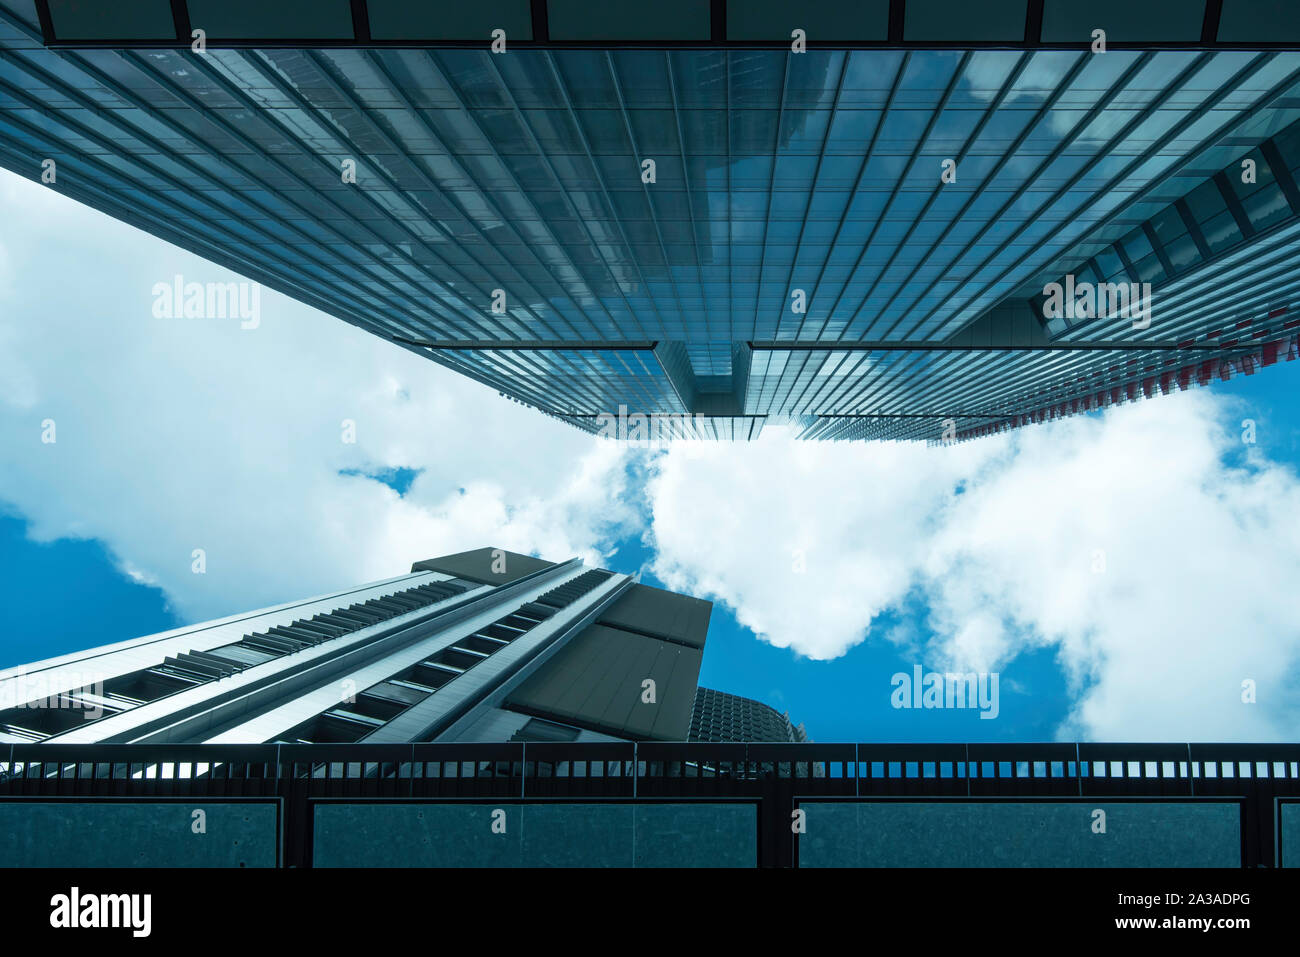 Looking up to blue sky and white clouds in a narrow gap between rising glass office towers in Sydney, Australia Stock Photo